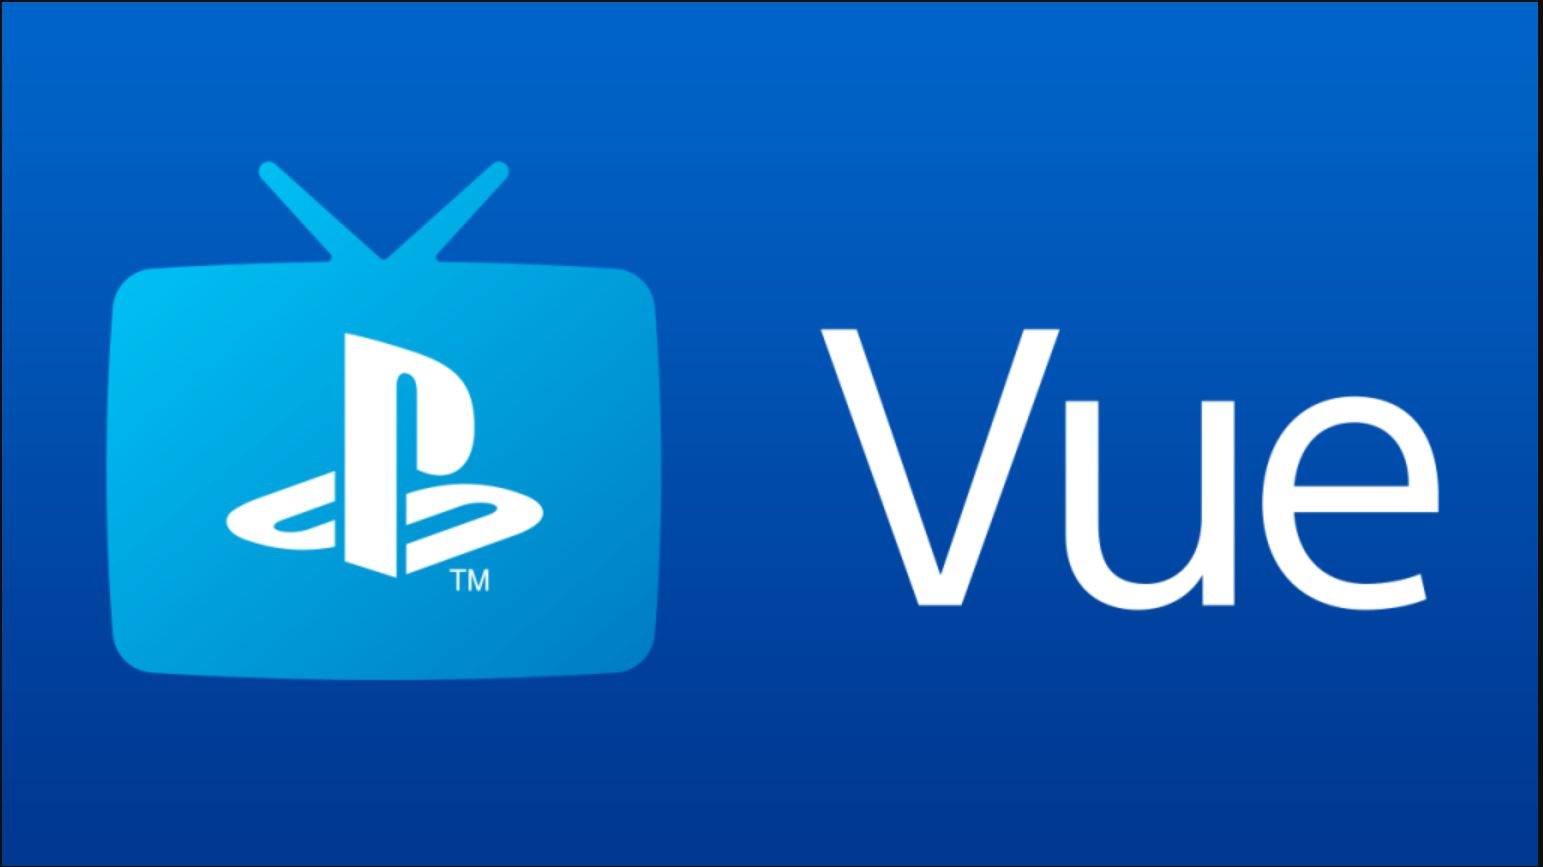 PlayStation Vue home location errors